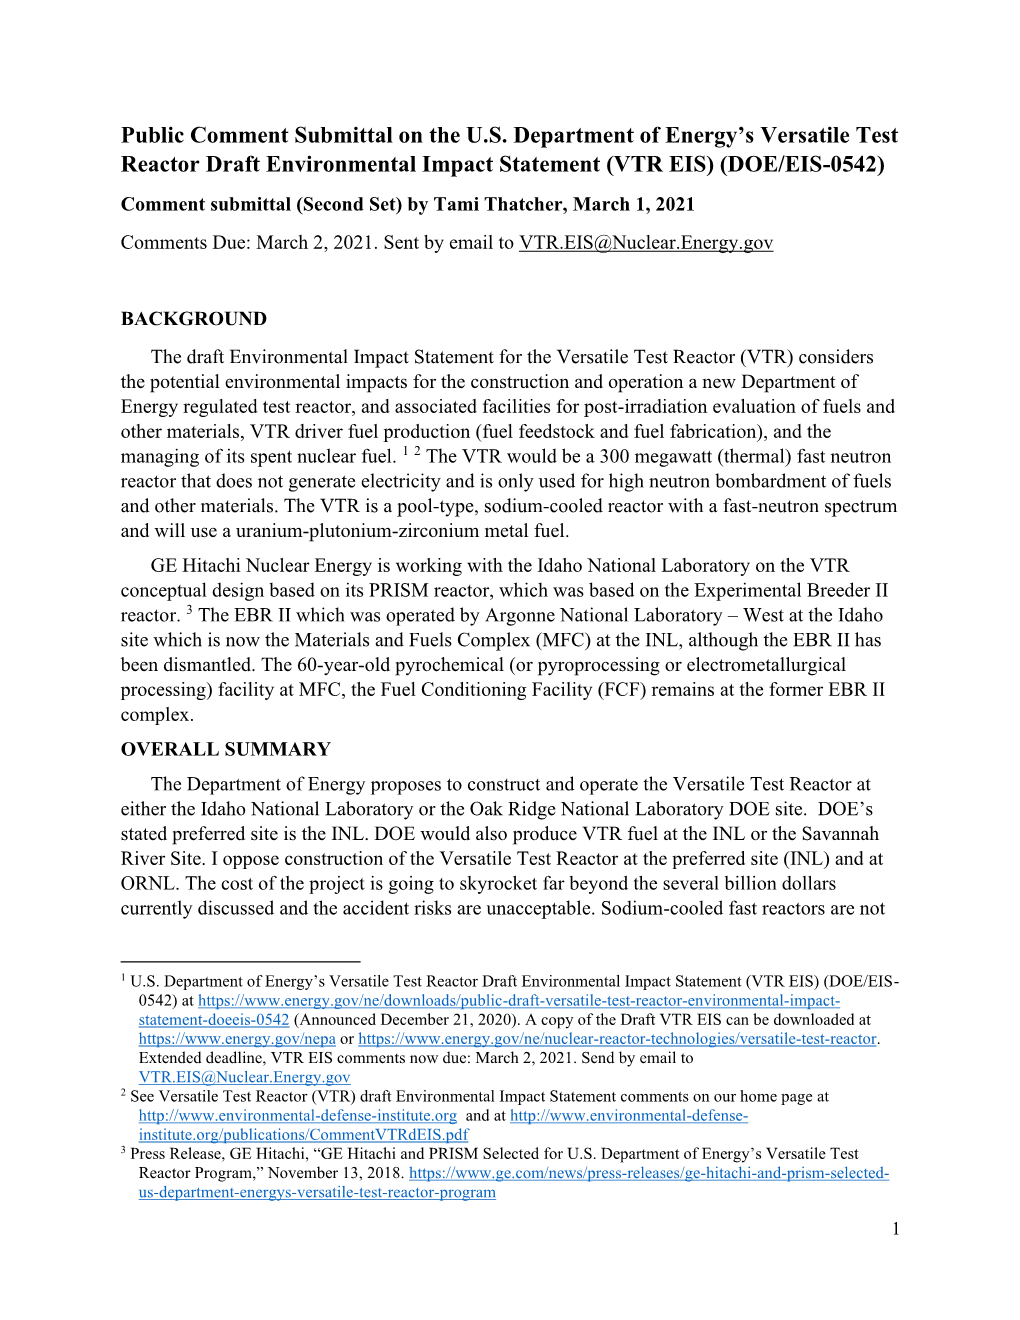 Public Comment Submittal on the U.S. Department of Energy's Versatile Test Reactor Draft Environmental Impact Statement (VTR E